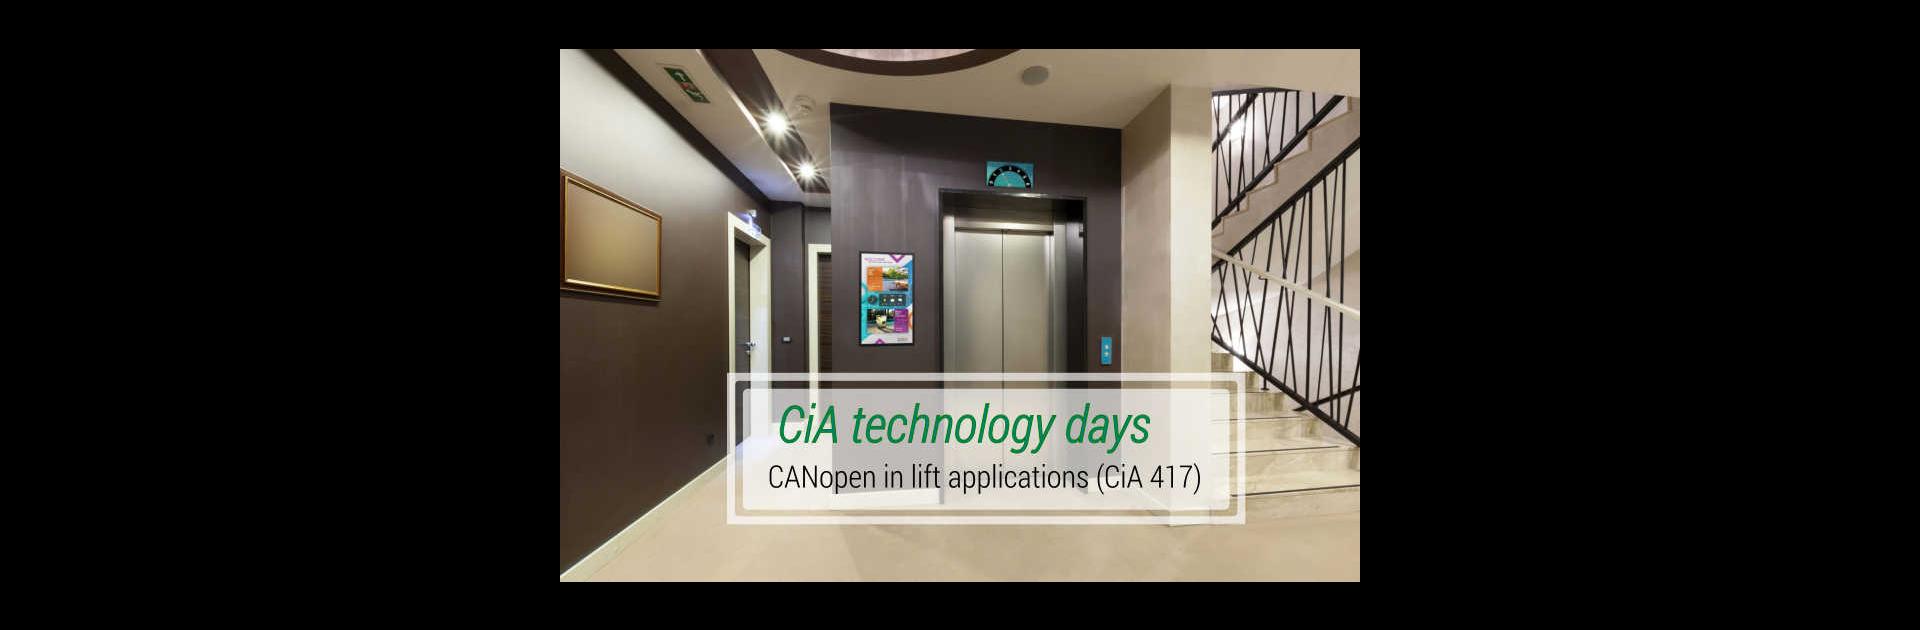 CiA technology days - CANopen in lift applications